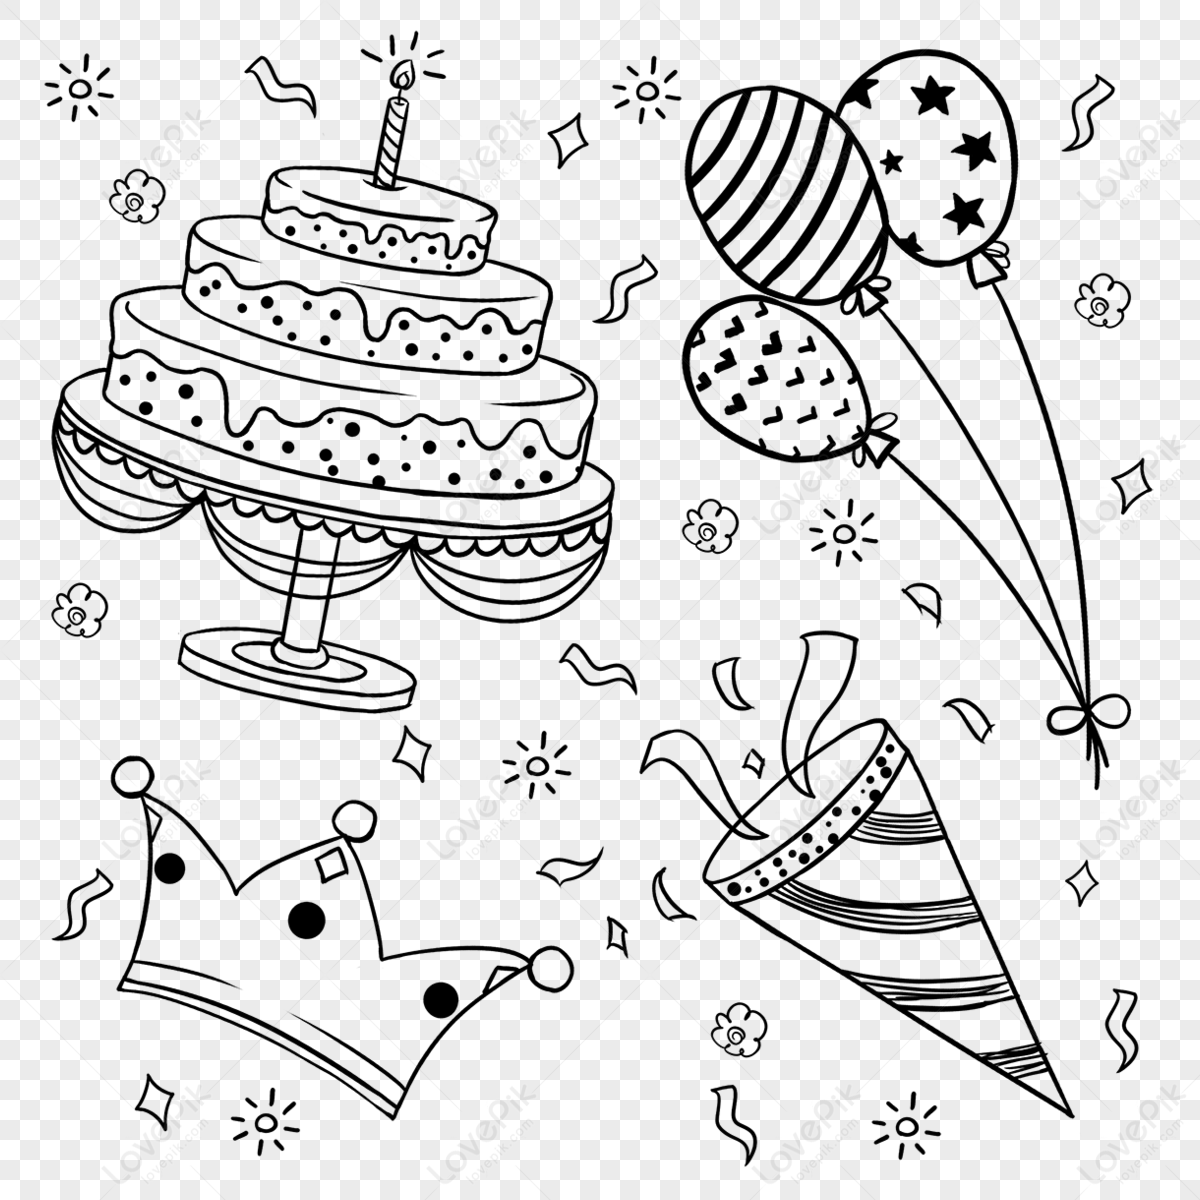 Birthday Cake, Birthday Cake Slice, Cake and Candles, Svg Cut Files &  Clipart Includes Limited Commercial Use - Etsy